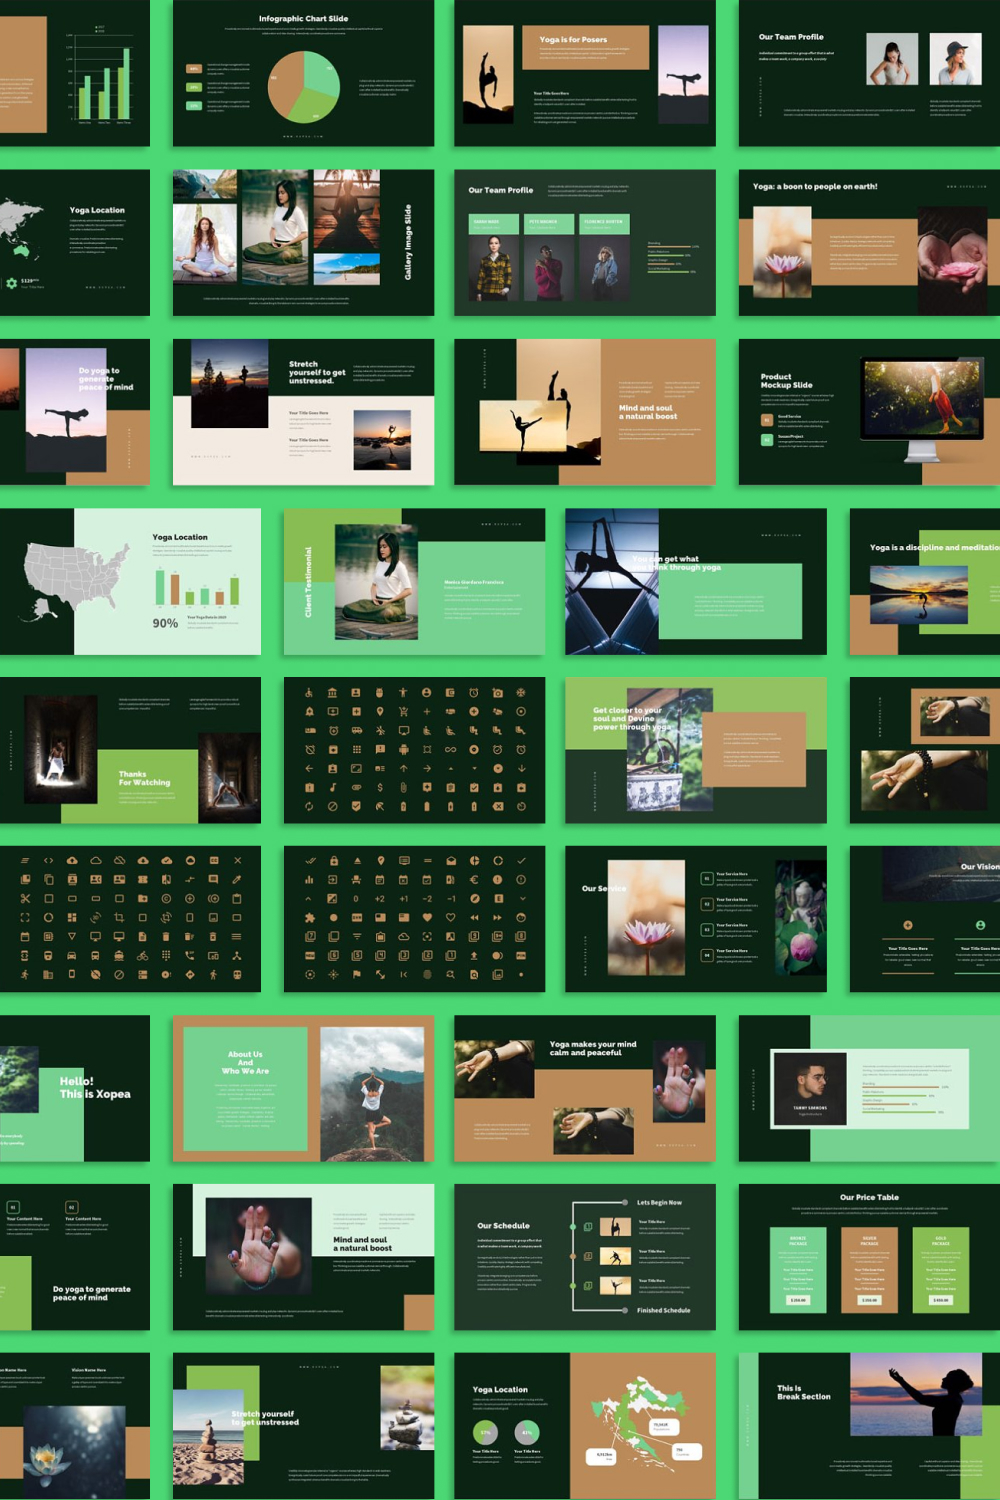 The preview of presentations and slides is green.